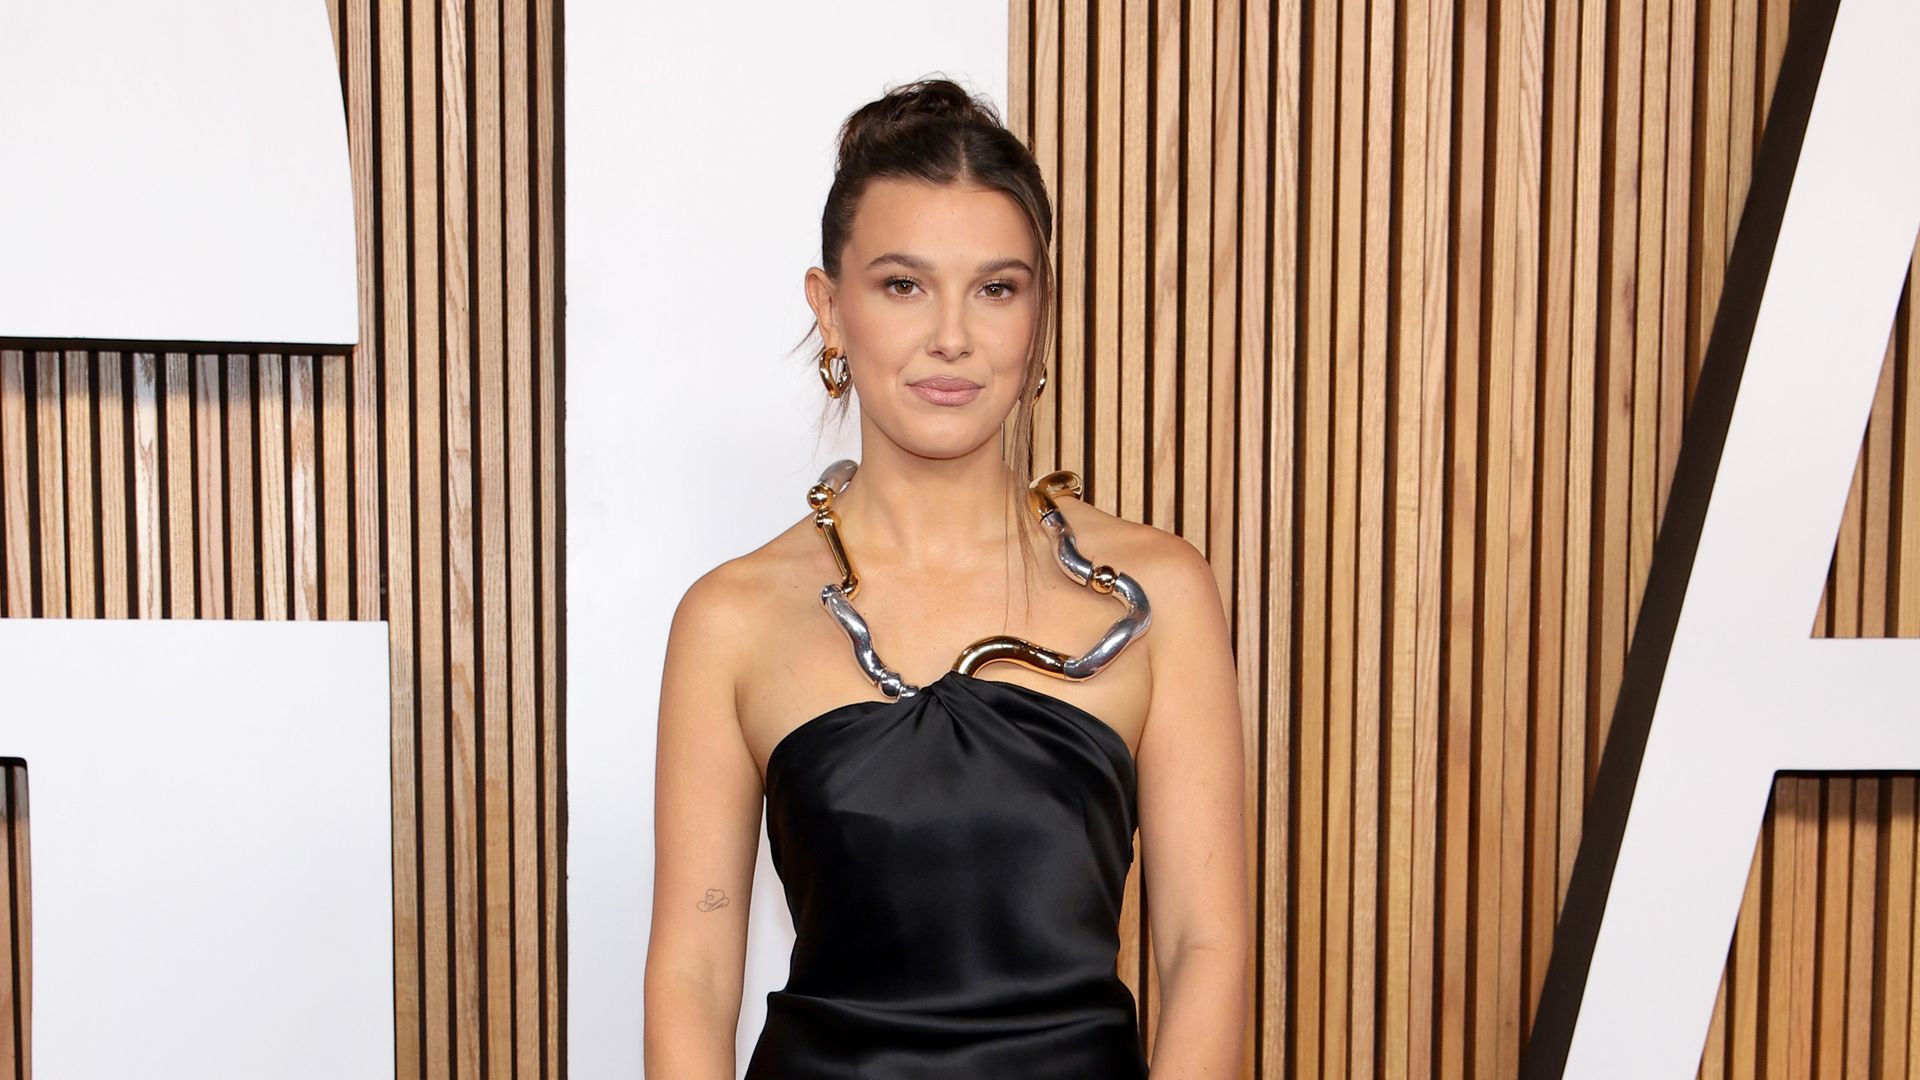 NEW YORK, NEW YORK - NOVEMBER 07: Millie Bobby Brown attends Glamour Women of the Year 2023 at Jazz at Lincoln Center on November 07, 2023 in New York City. (Photo by Dimitrios Kambouris/Getty Images for Glamour)